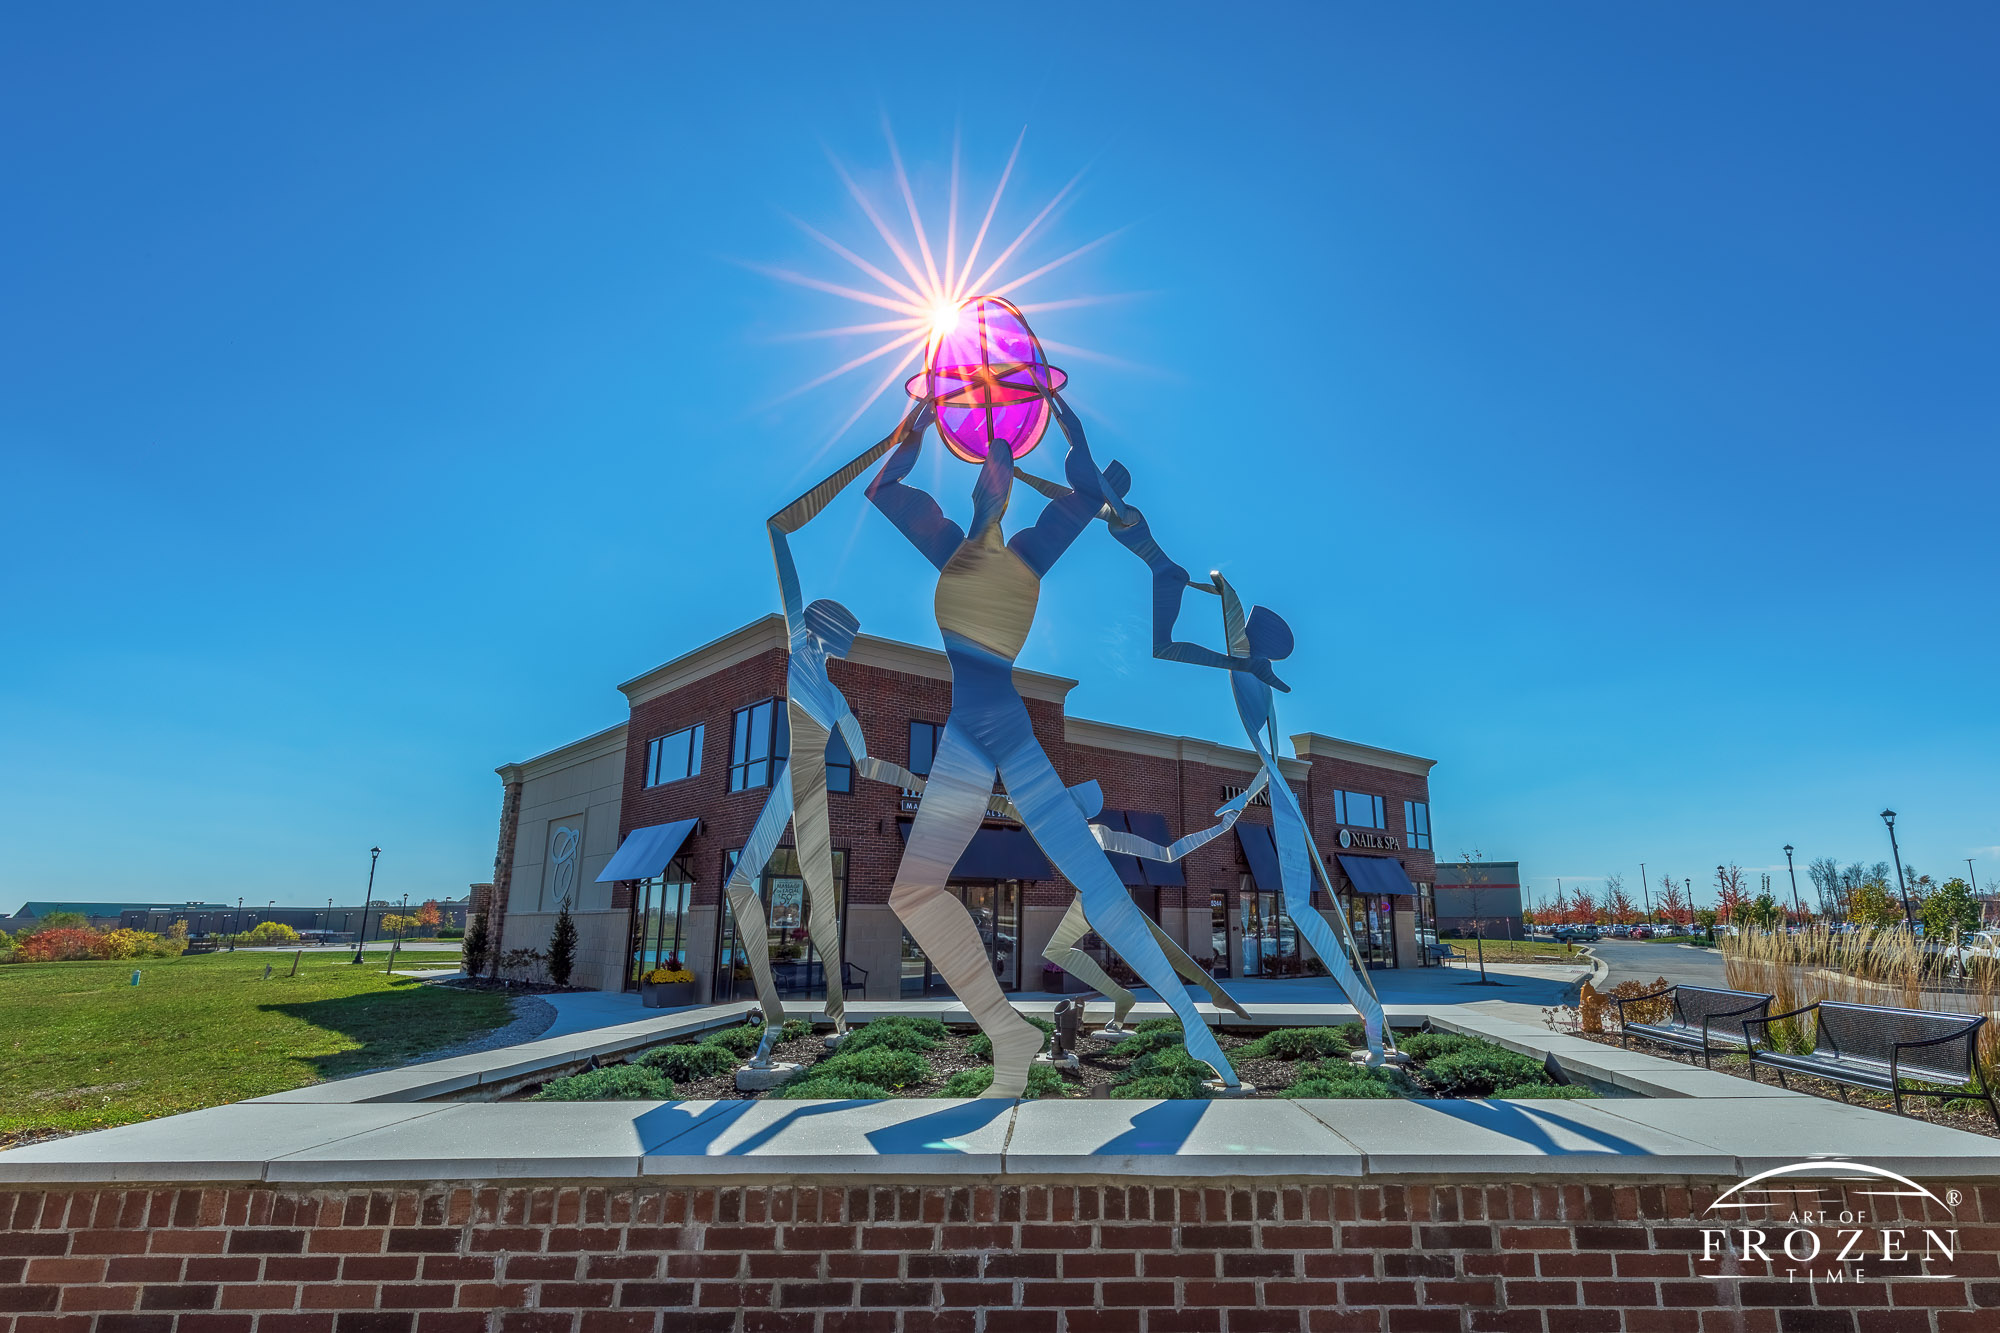 A stainless steel sculpture called Celebration lies in Cornerstone Park, Centerville Ohio as the sun backlits the stained glass ornament being held in the air by a stylized family dancing in a circle.